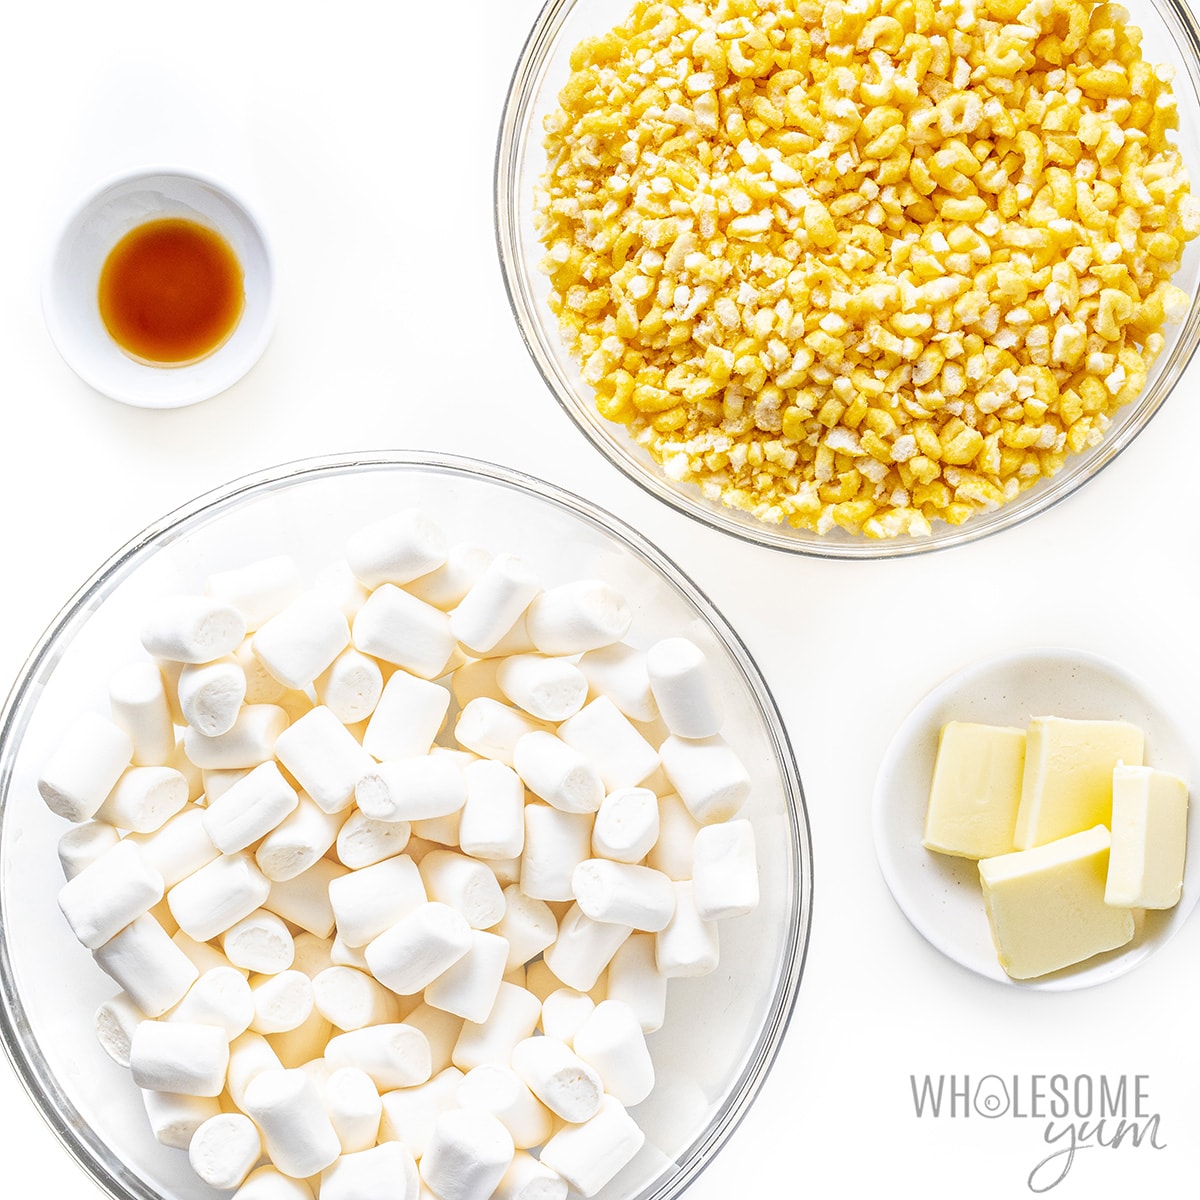 Ingredients for rice krispie treats in small bowls.